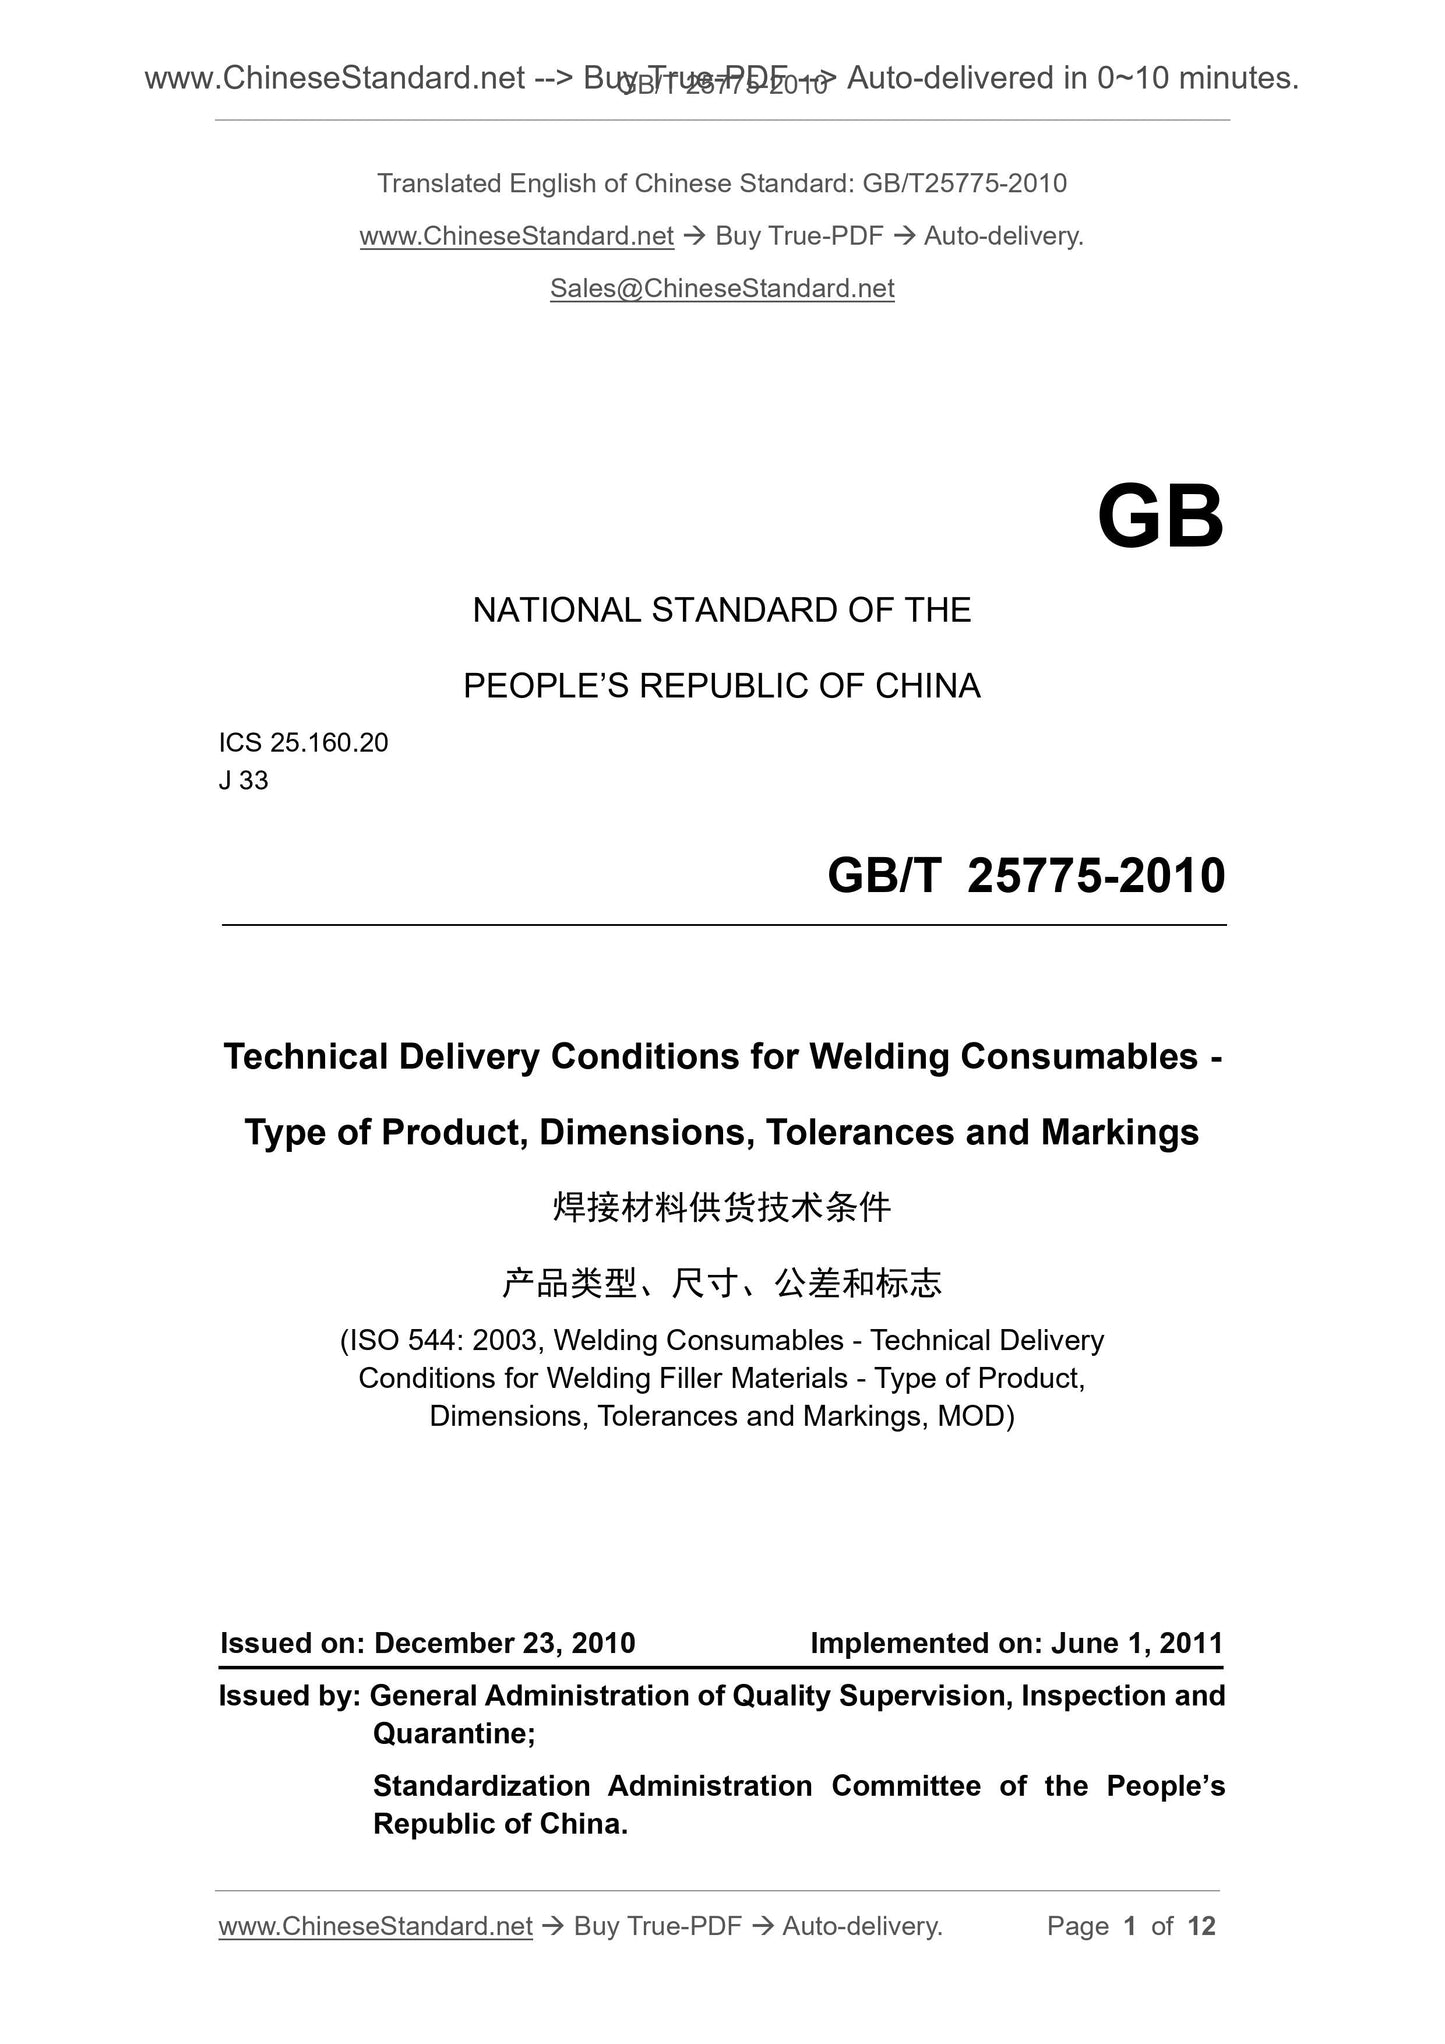 GB/T 25775-2010 Page 1